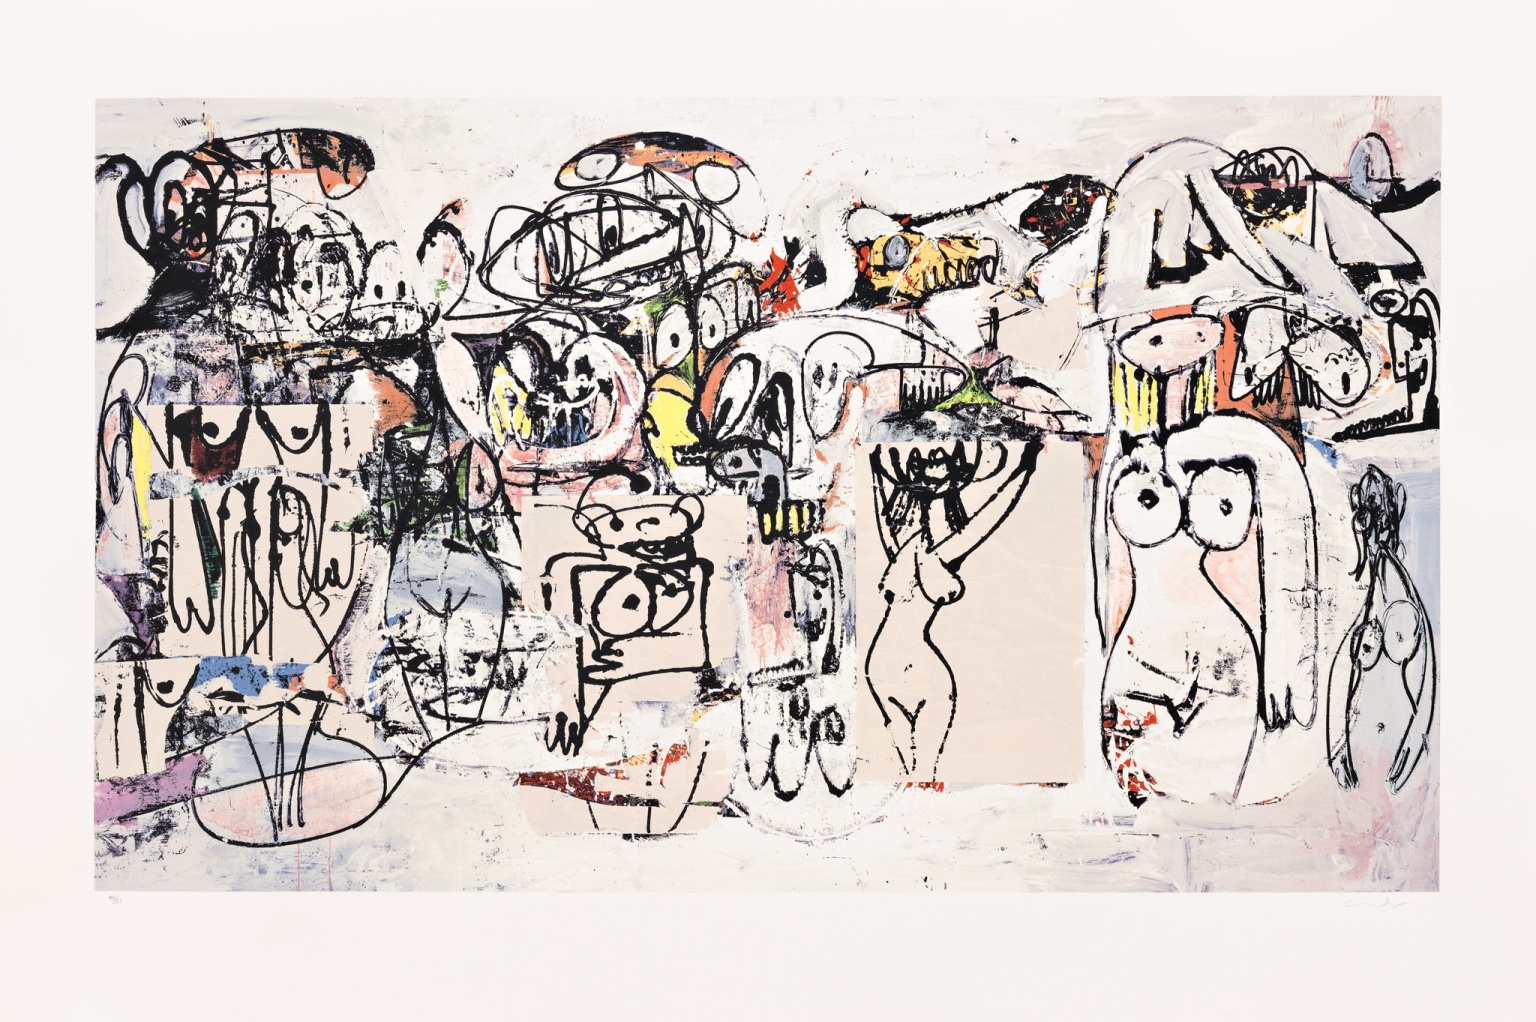 "Invocations of Miles" (2000) by George Condo